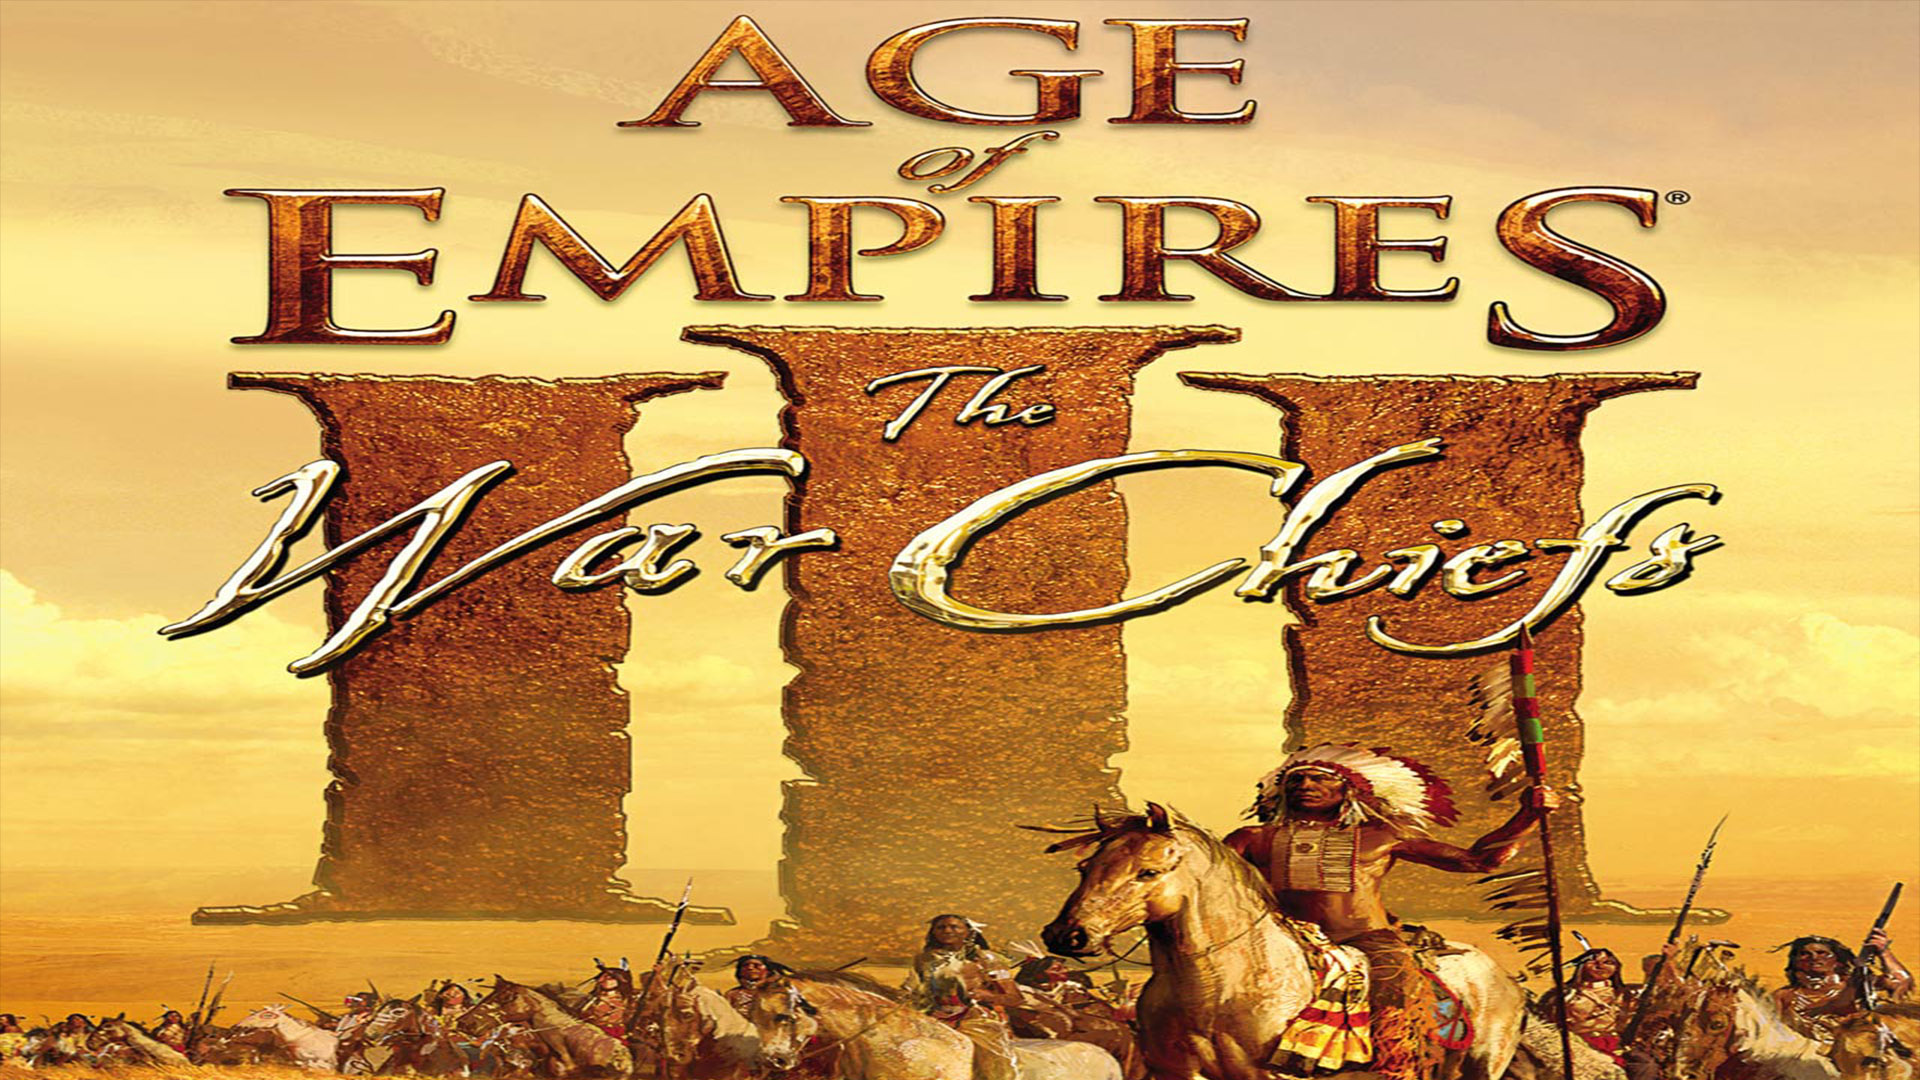 Age of Empires III: The WarChiefs HD Wallpaper